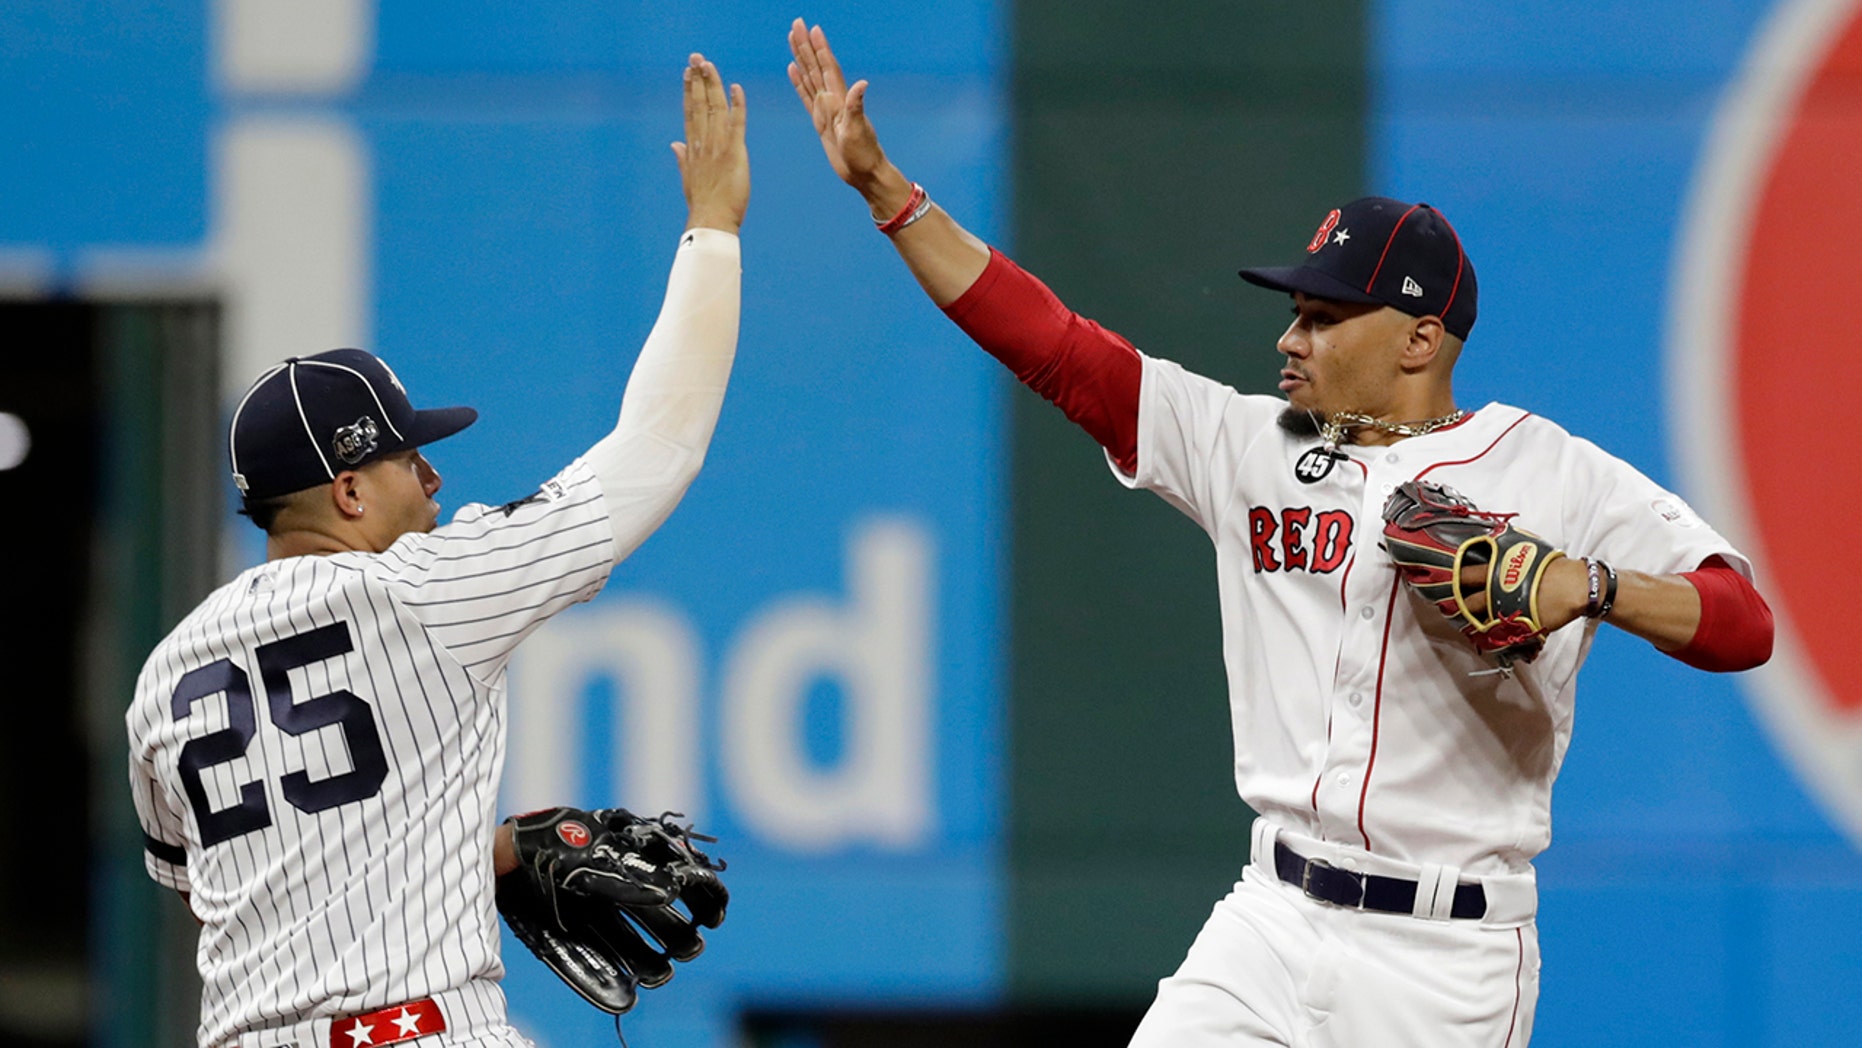 American League Gleyber Torres, left, of the New York Yankees, and the American League, the Boston Red Sox, celebrate a 4-on-3 victory of the National League at the MLB All-Star Game on Tuesday, July 9, 2019, at Cleveland. (AP Photo / Tony Dejak)